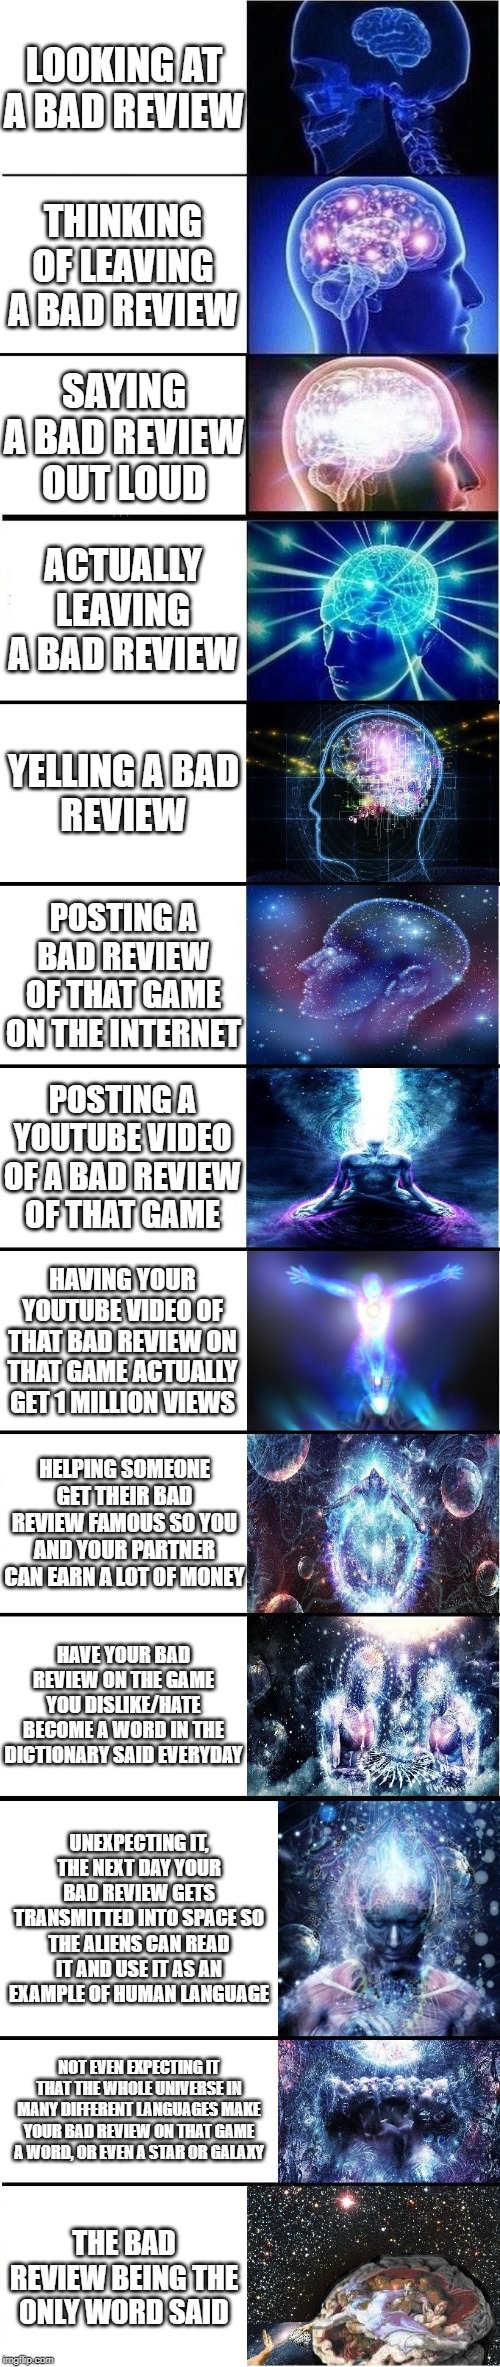 expanding brain | LOOKING AT A BAD REVIEW; THINKING OF LEAVING A BAD REVIEW; SAYING A BAD REVIEW OUT LOUD; ACTUALLY LEAVING A BAD REVIEW; YELLING A BAD
REVIEW; POSTING A BAD REVIEW OF THAT GAME ON THE INTERNET; POSTING A YOUTUBE VIDEO OF A BAD REVIEW OF THAT GAME; HAVING YOUR YOUTUBE VIDEO OF THAT BAD REVIEW ON THAT GAME ACTUALLY GET 1 MILLION VIEWS; HELPING SOMEONE GET THEIR BAD REVIEW FAMOUS SO YOU AND YOUR PARTNER CAN EARN A LOT OF MONEY; HAVE YOUR BAD REVIEW ON THE GAME YOU DISLIKE/HATE BECOME A WORD IN THE DICTIONARY SAID EVERYDAY; UNEXPECTING IT, THE NEXT DAY YOUR BAD REVIEW GETS TRANSMITTED INTO SPACE SO THE ALIENS CAN READ IT AND USE IT AS AN EXAMPLE OF HUMAN LANGUAGE; NOT EVEN EXPECTING IT THAT THE WHOLE UNIVERSE IN MANY DIFFERENT LANGUAGES MAKE YOUR BAD REVIEW ON THAT GAME A WORD, OR EVEN A STAR OR GALAXY; THE BAD REVIEW BEING THE ONLY WORD SAID | image tagged in expanding brain | made w/ Imgflip meme maker